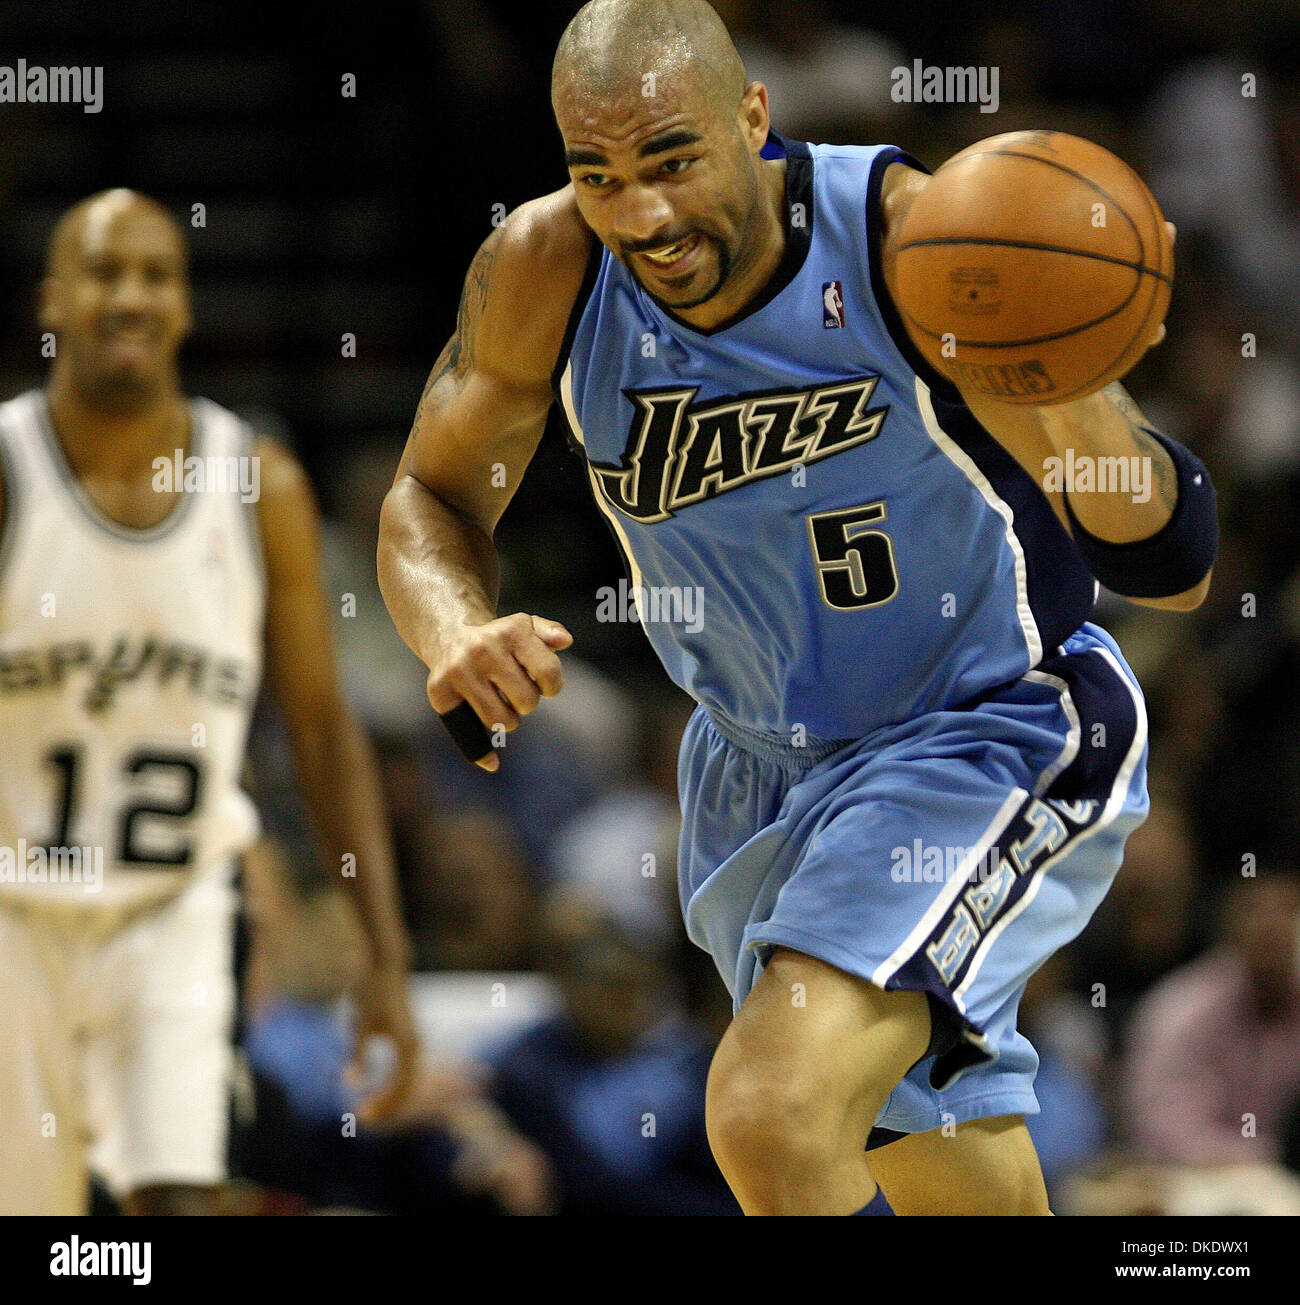 May 22, 2007 - San Antonio, TX, USA - Spurs'  forward BRUCE BOWEN (12) can only watch as  Jazz forward CARLOS BOOZER (5) intercepts his pass and heads for a fast break basket during first half action in the Western Conference Finals game two in San Antonio Tuesday  May 22, 2007.  (Credit Image: © Delcia Lopez/San Antonio Express-News/ZUMA Press) RESTRICTIONS: US Tabloid RIGHTS OUT! Stock Photo